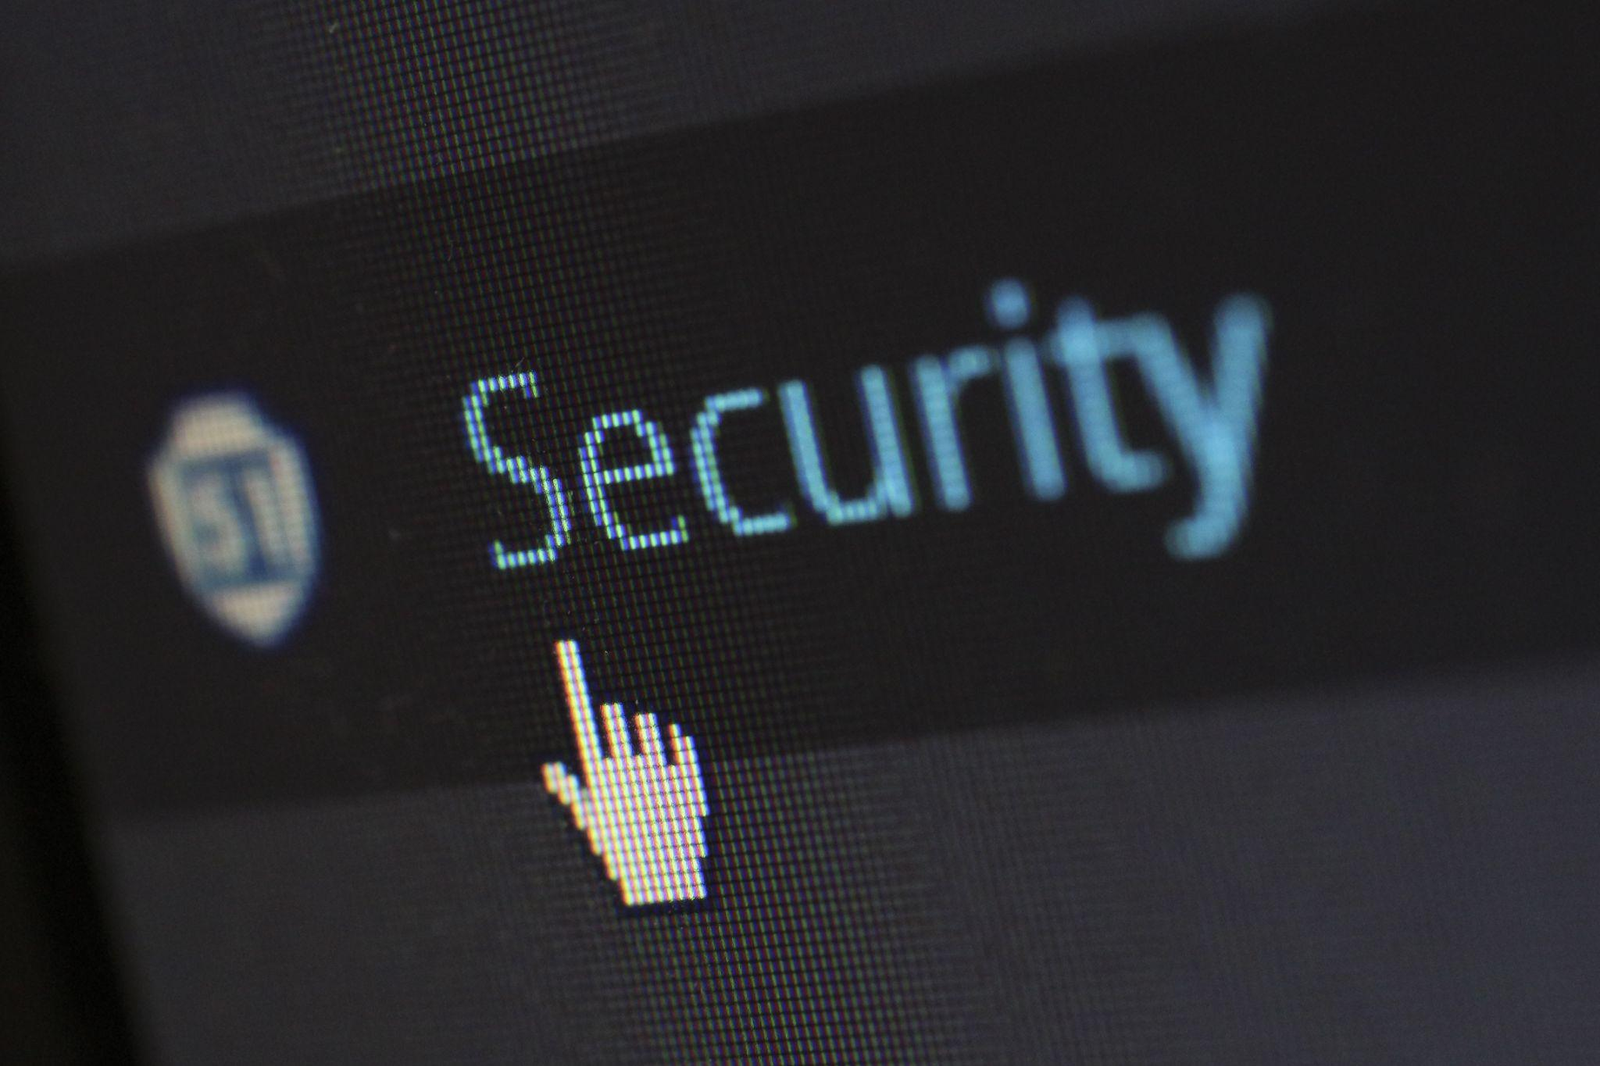 Close-up image of a computer screen with the word "Security" highlighted in light blue and a cursor icon resembling a pointing hand positioned nearby.